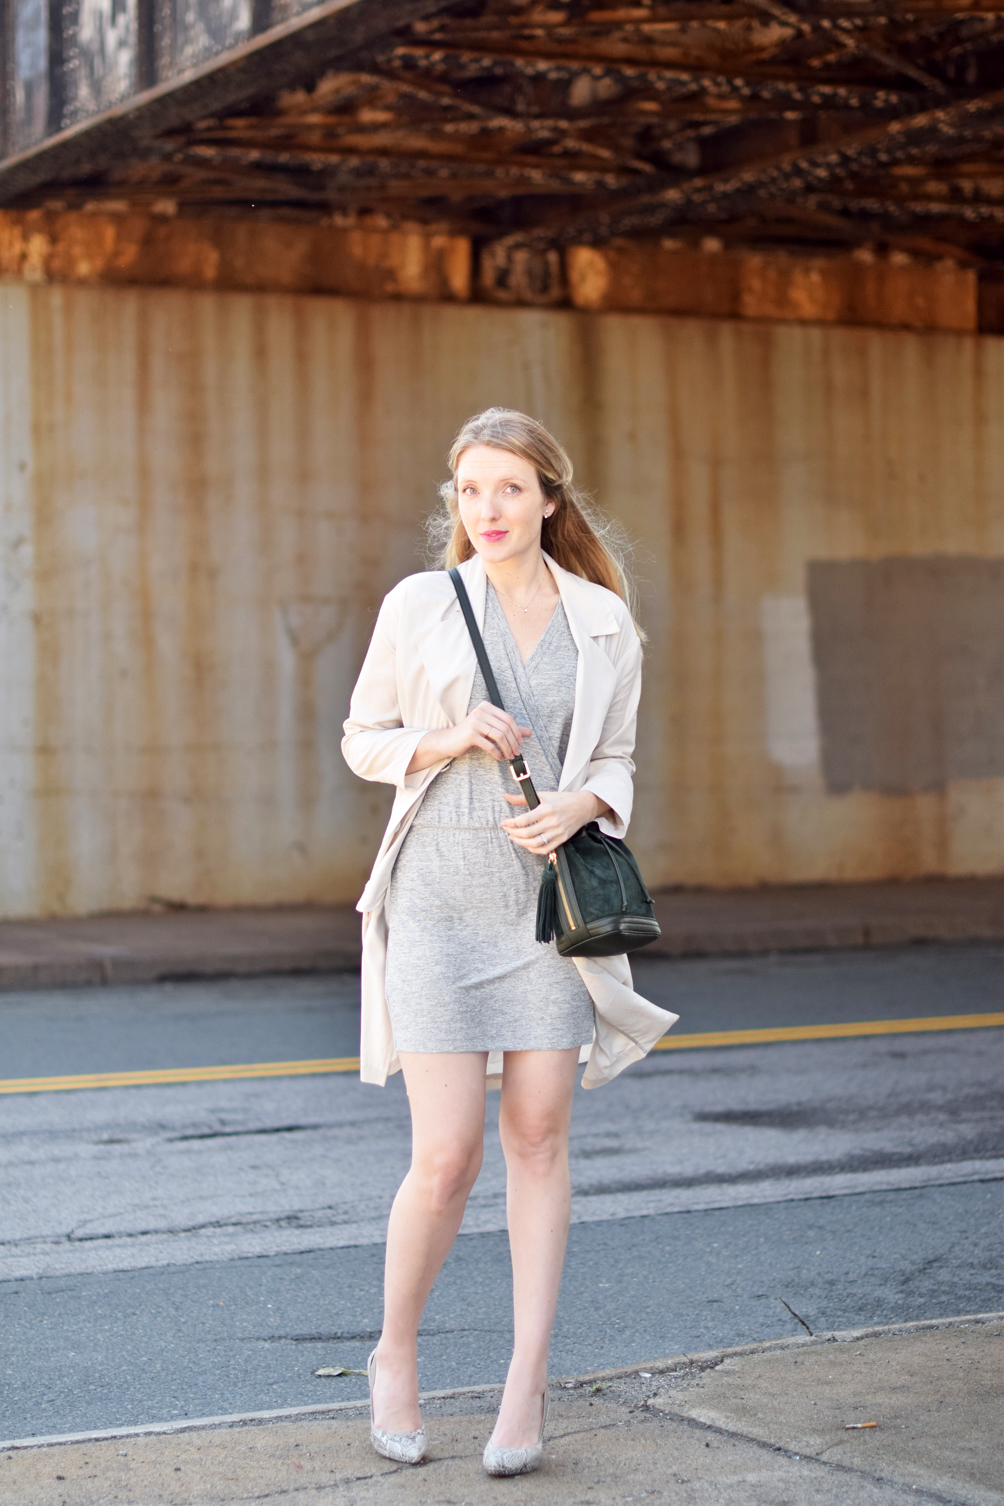 crossover blouson dress with a spring trench coat and snakeskin heels - leslie musser, one brass fox